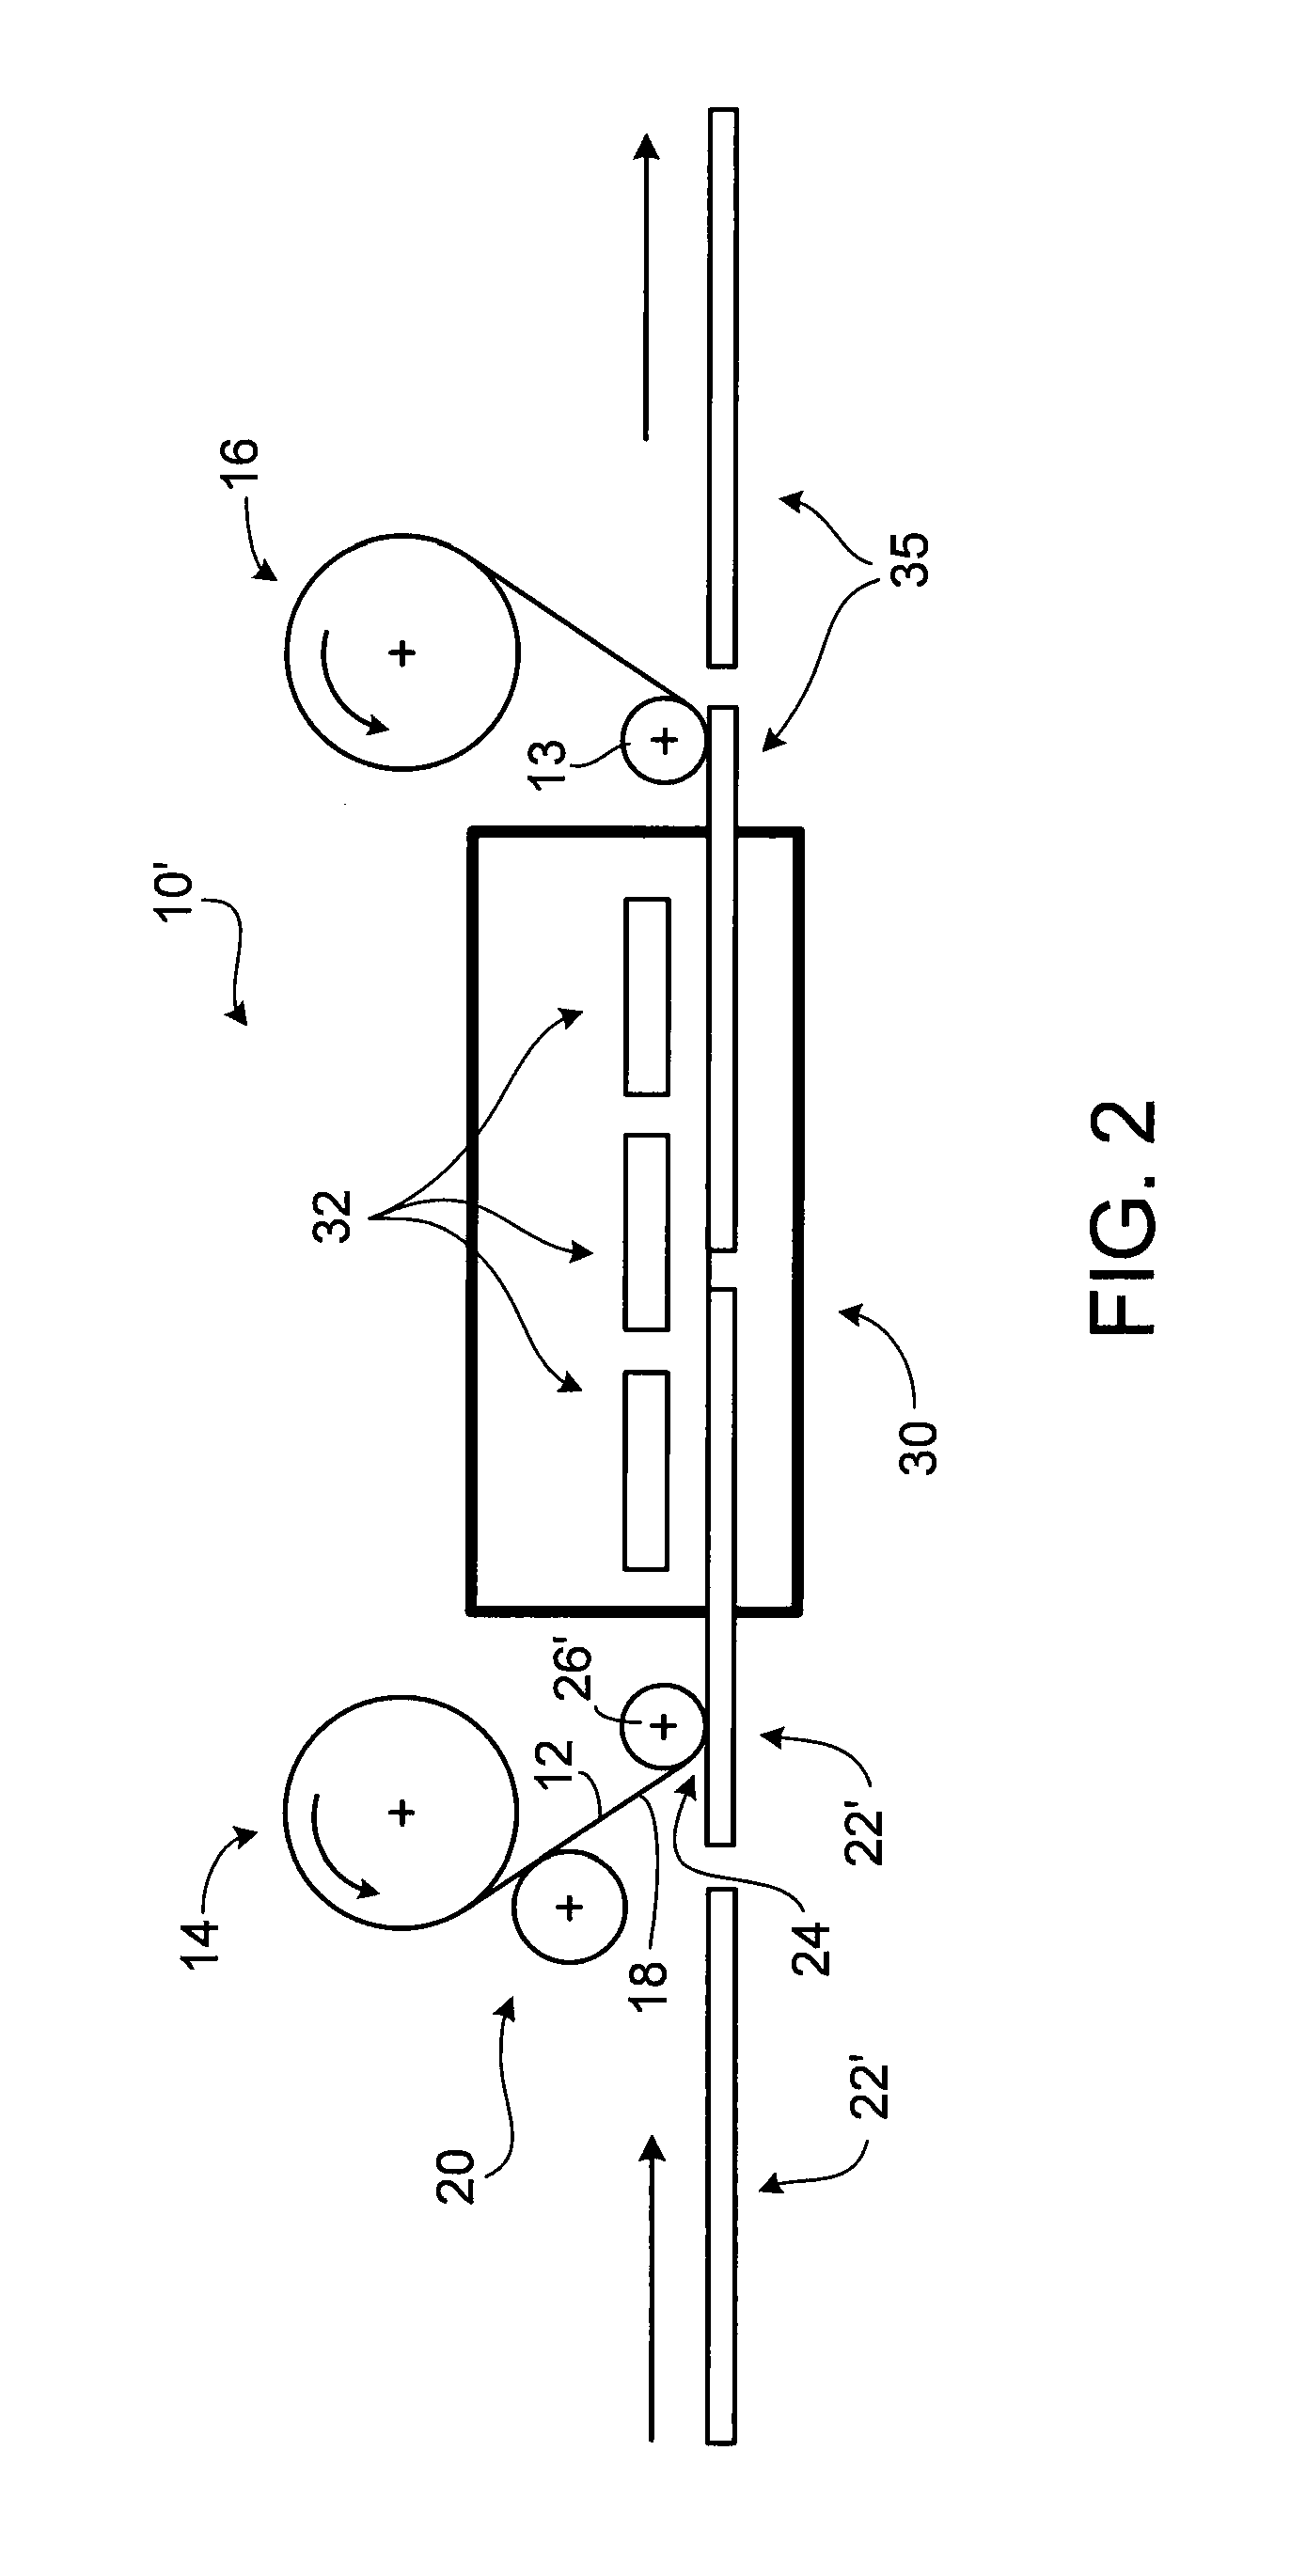 Materials Having a Textured Surface and Methods for Producing Same